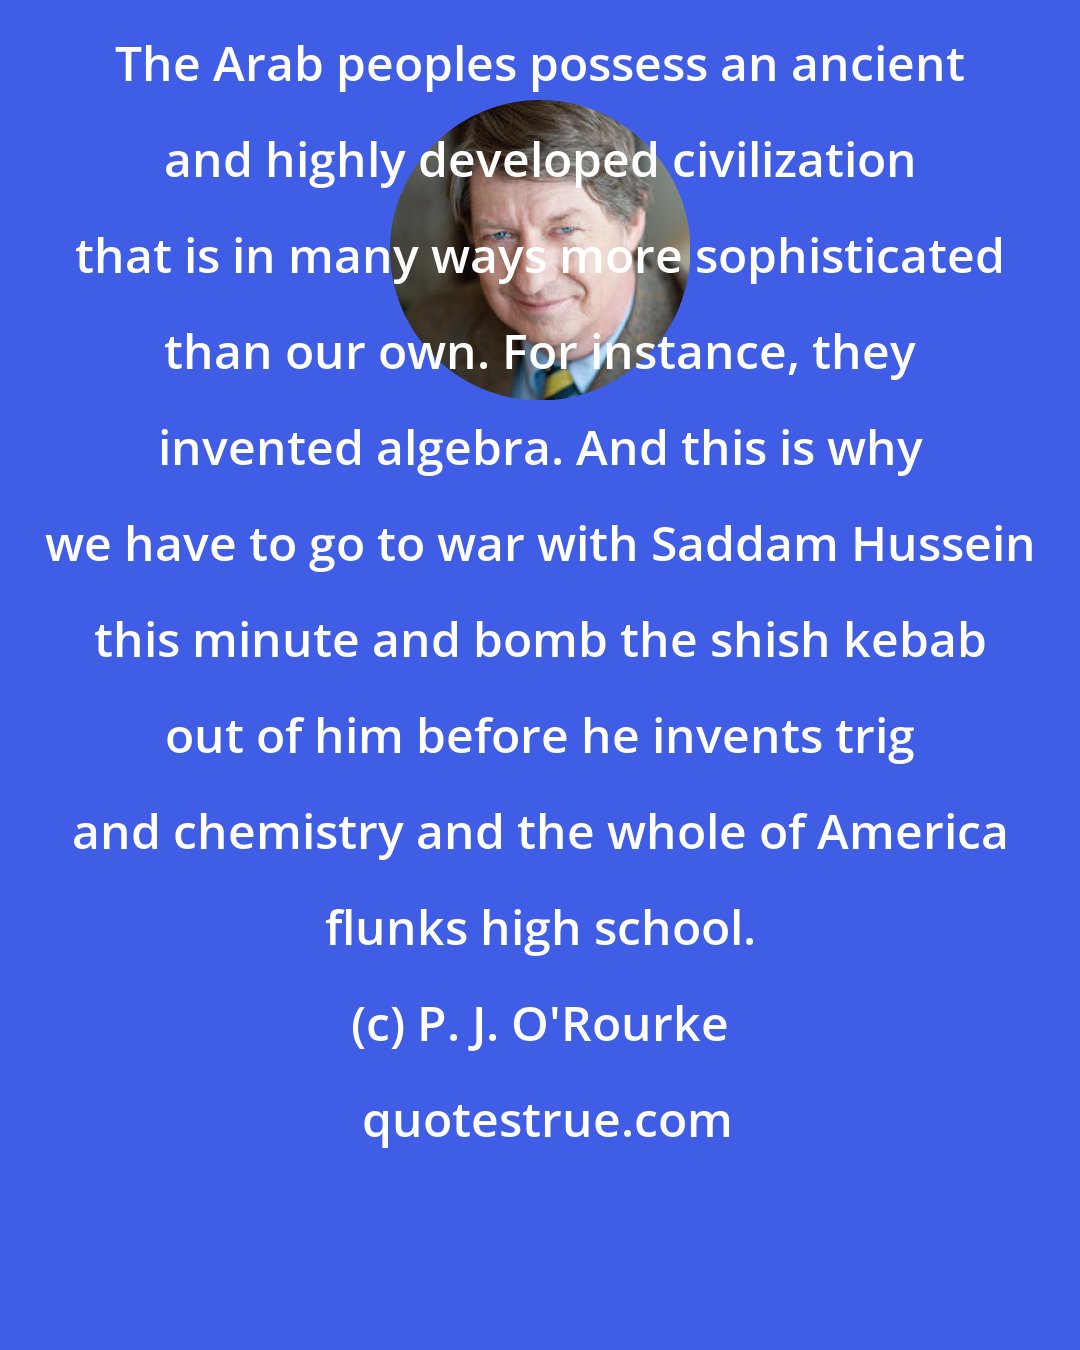 P. J. O'Rourke: The Arab peoples possess an ancient and highly developed civilization that is in many ways more sophisticated than our own. For instance, they invented algebra. And this is why we have to go to war with Saddam Hussein this minute and bomb the shish kebab out of him before he invents trig and chemistry and the whole of America flunks high school.